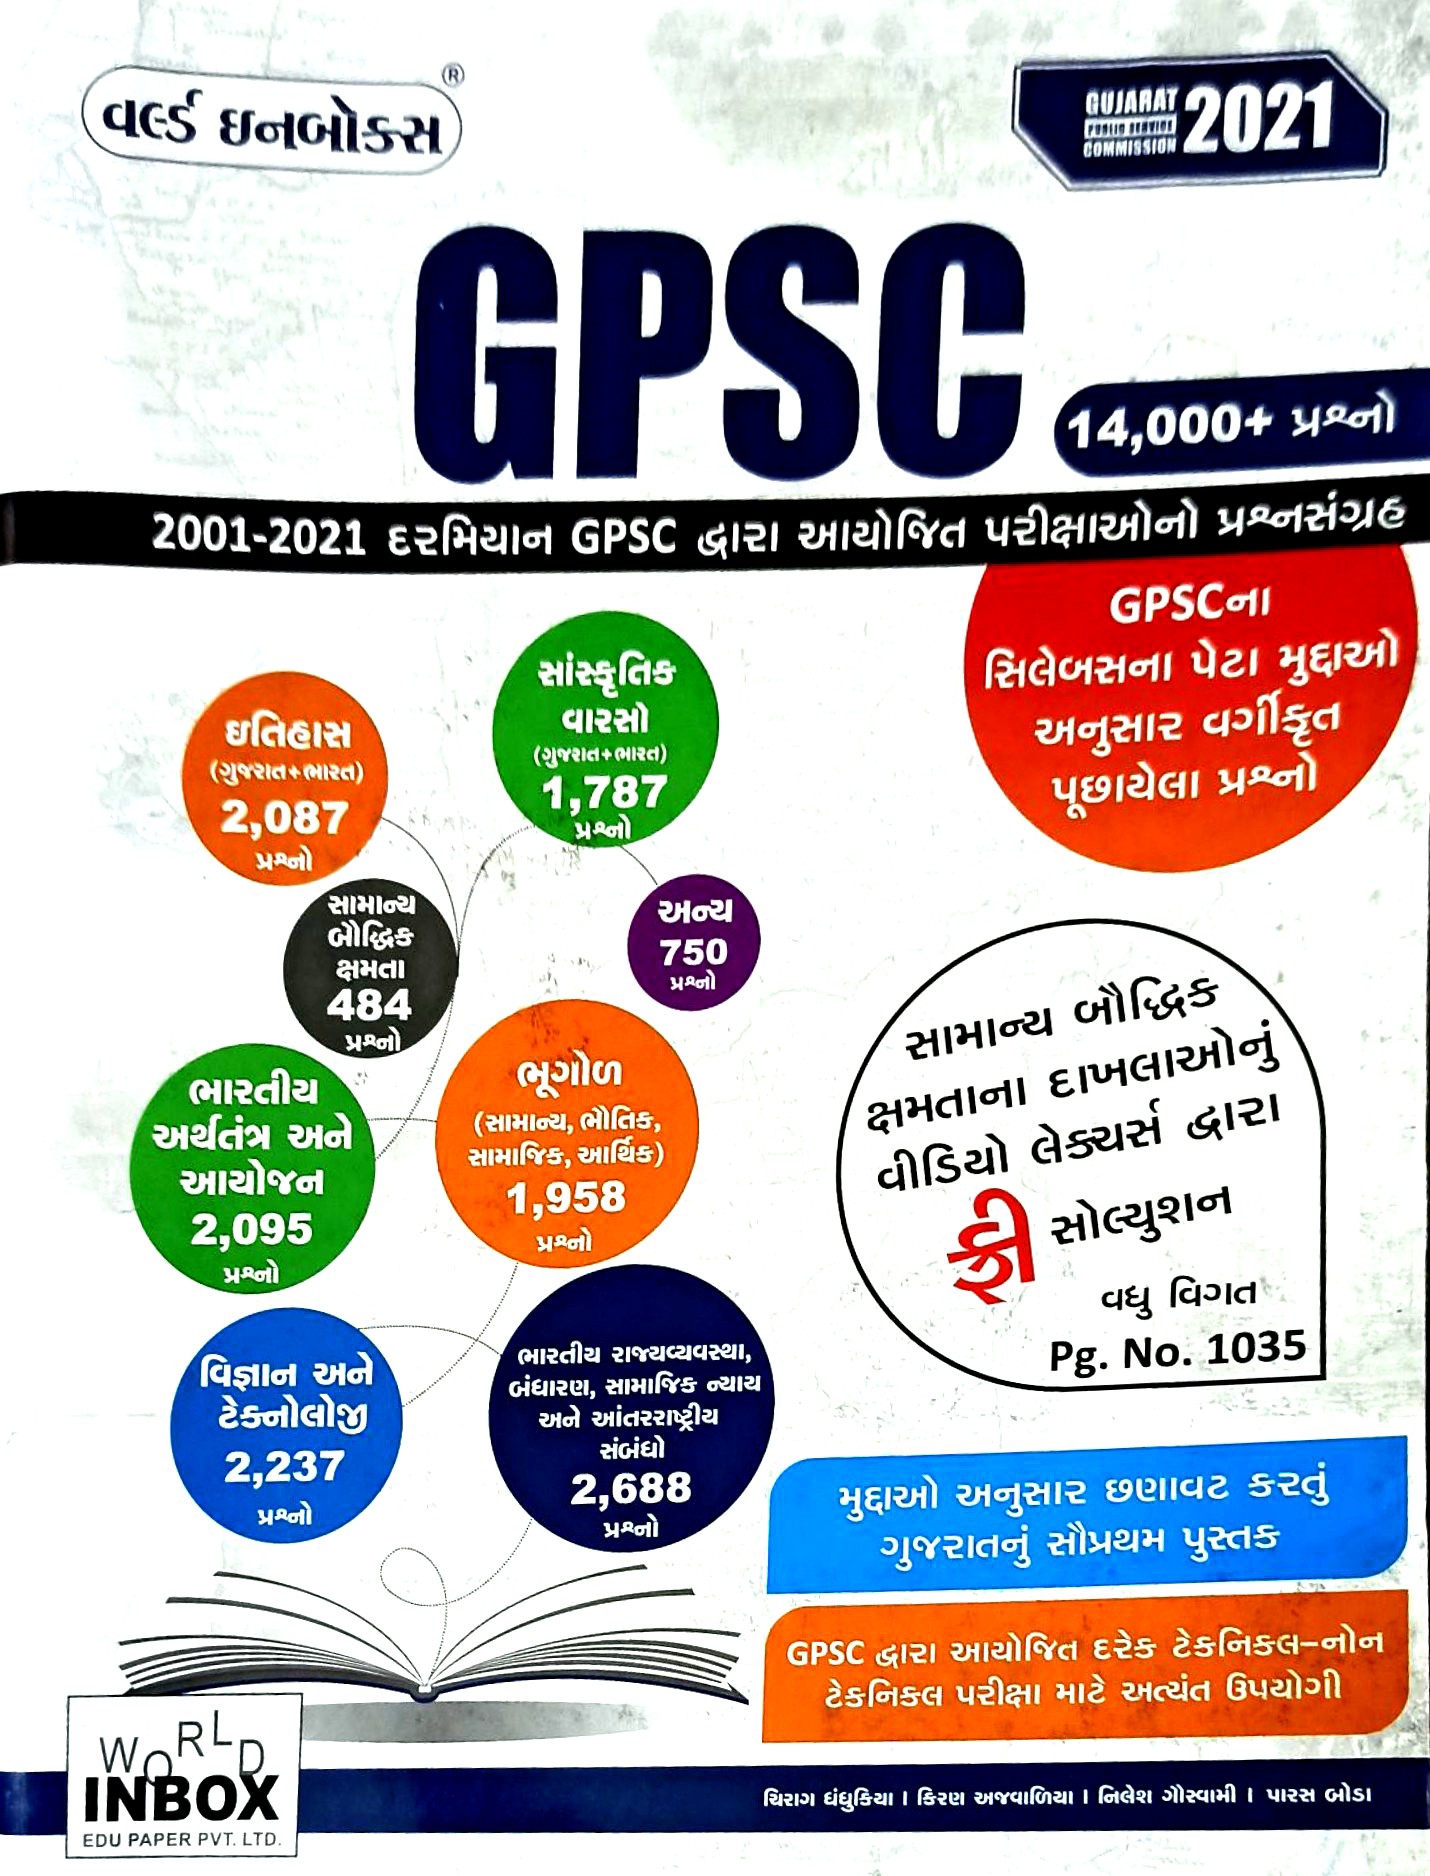 Gpsc 14,000+ Qoustions With Answers 